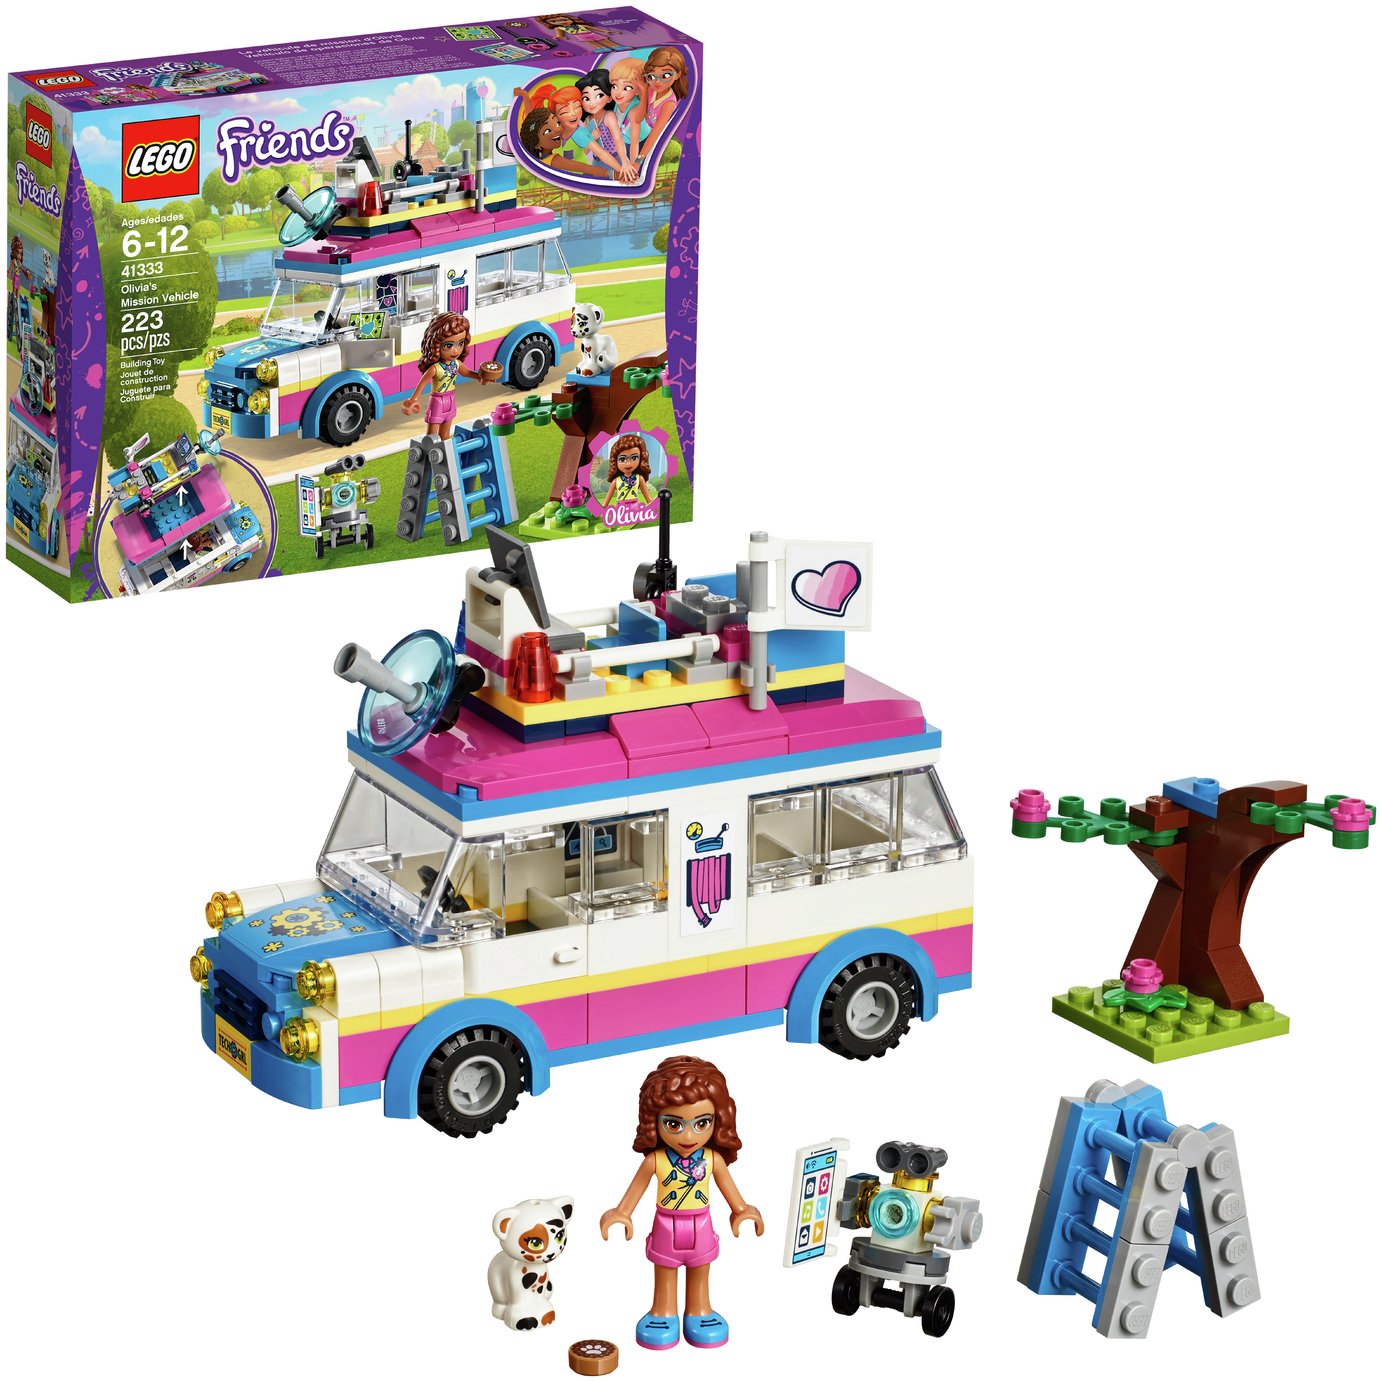 LEGO Friends Heartlake Olivia's Mission Vehicle Toy - 41333